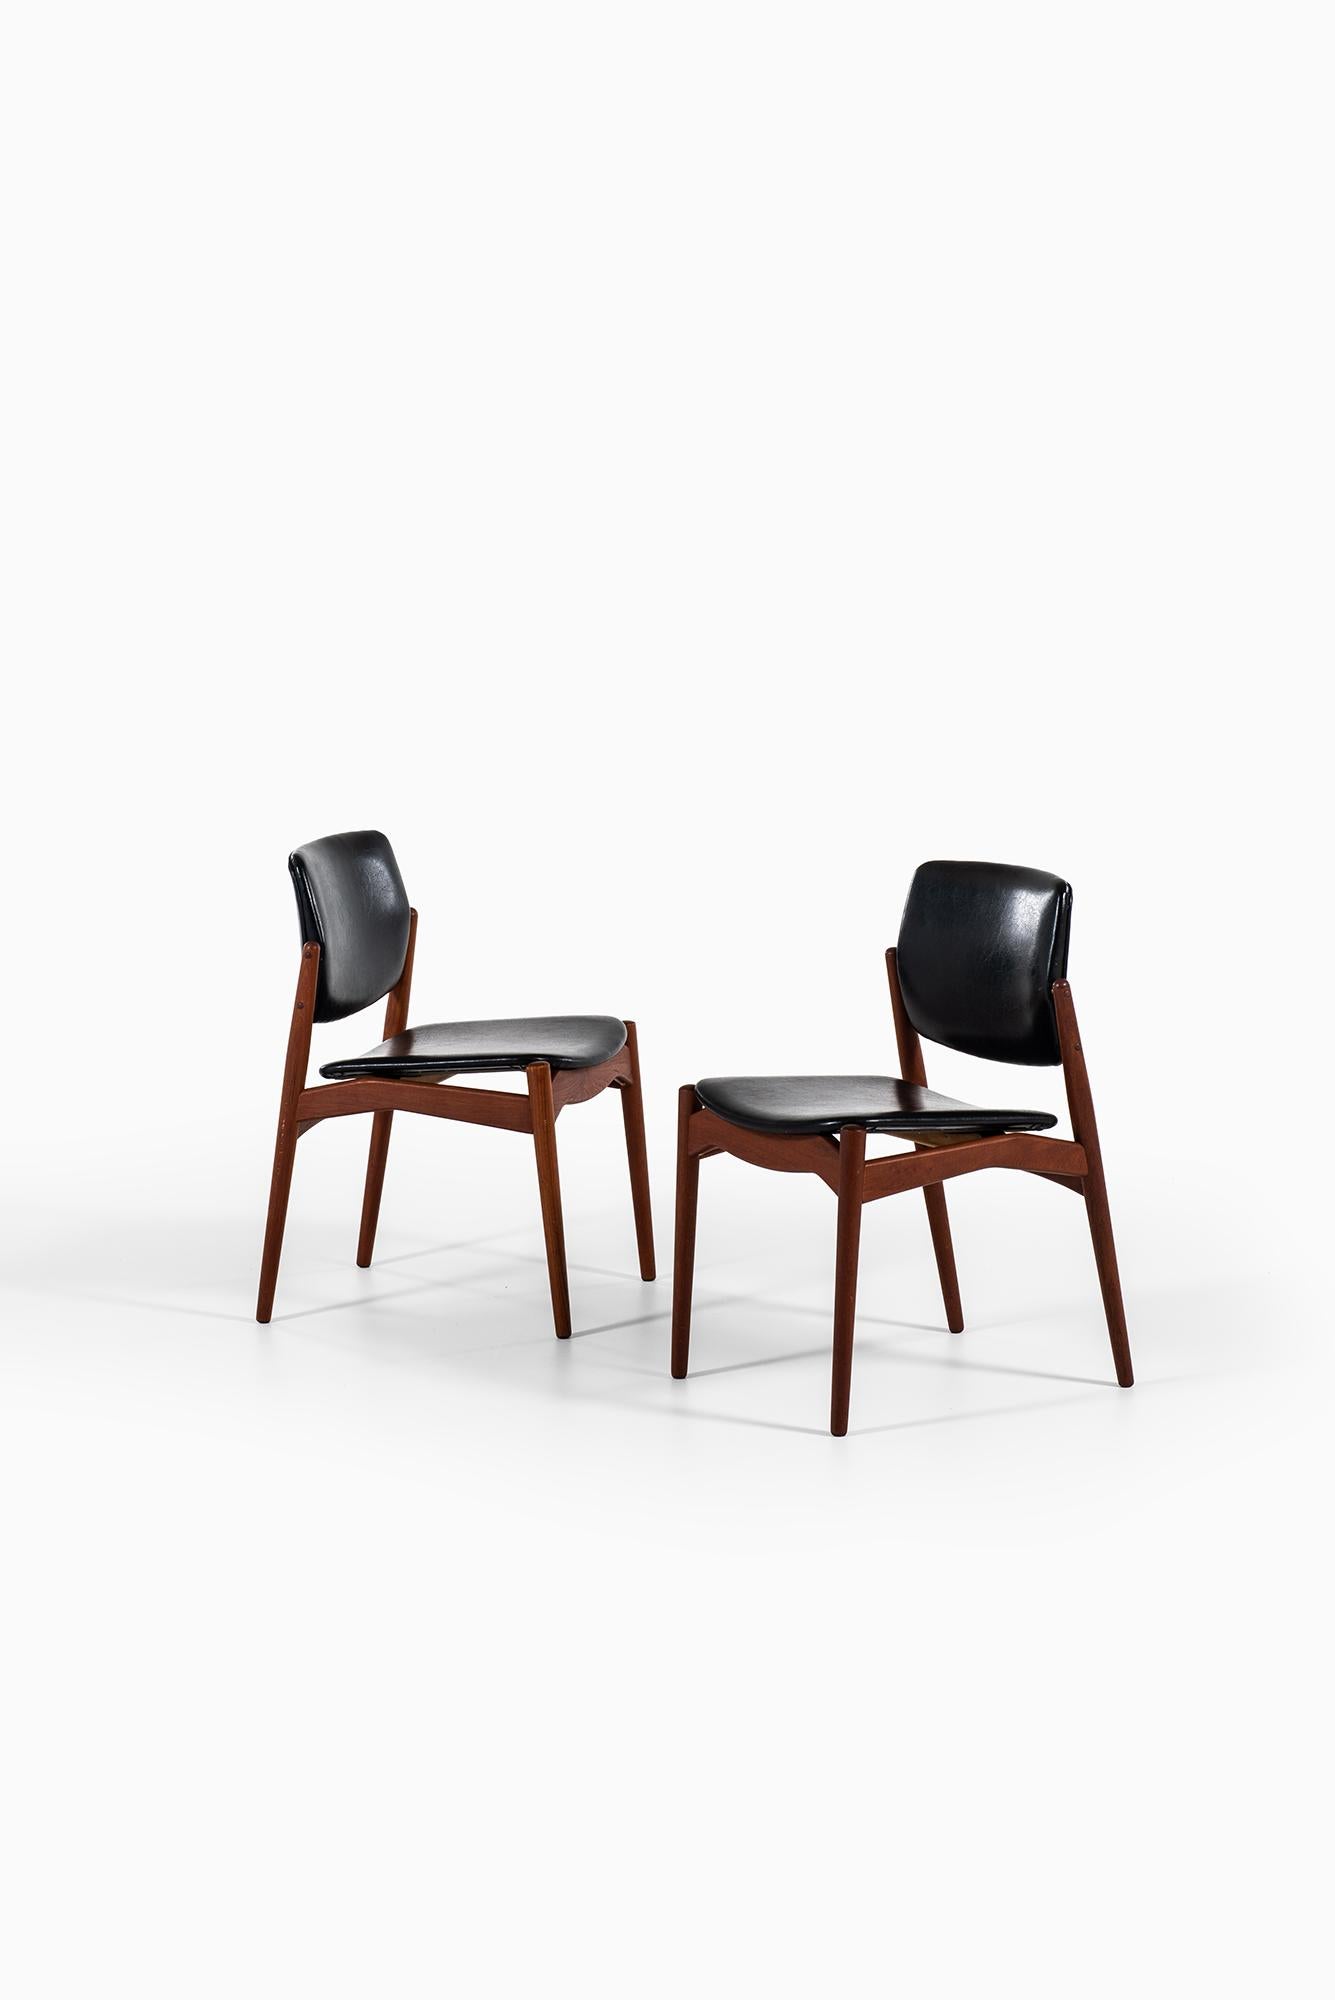 Faux Leather Erik Buch Dining Chairs Model Captain by Ørum Møbelsnedkeri in Denmark